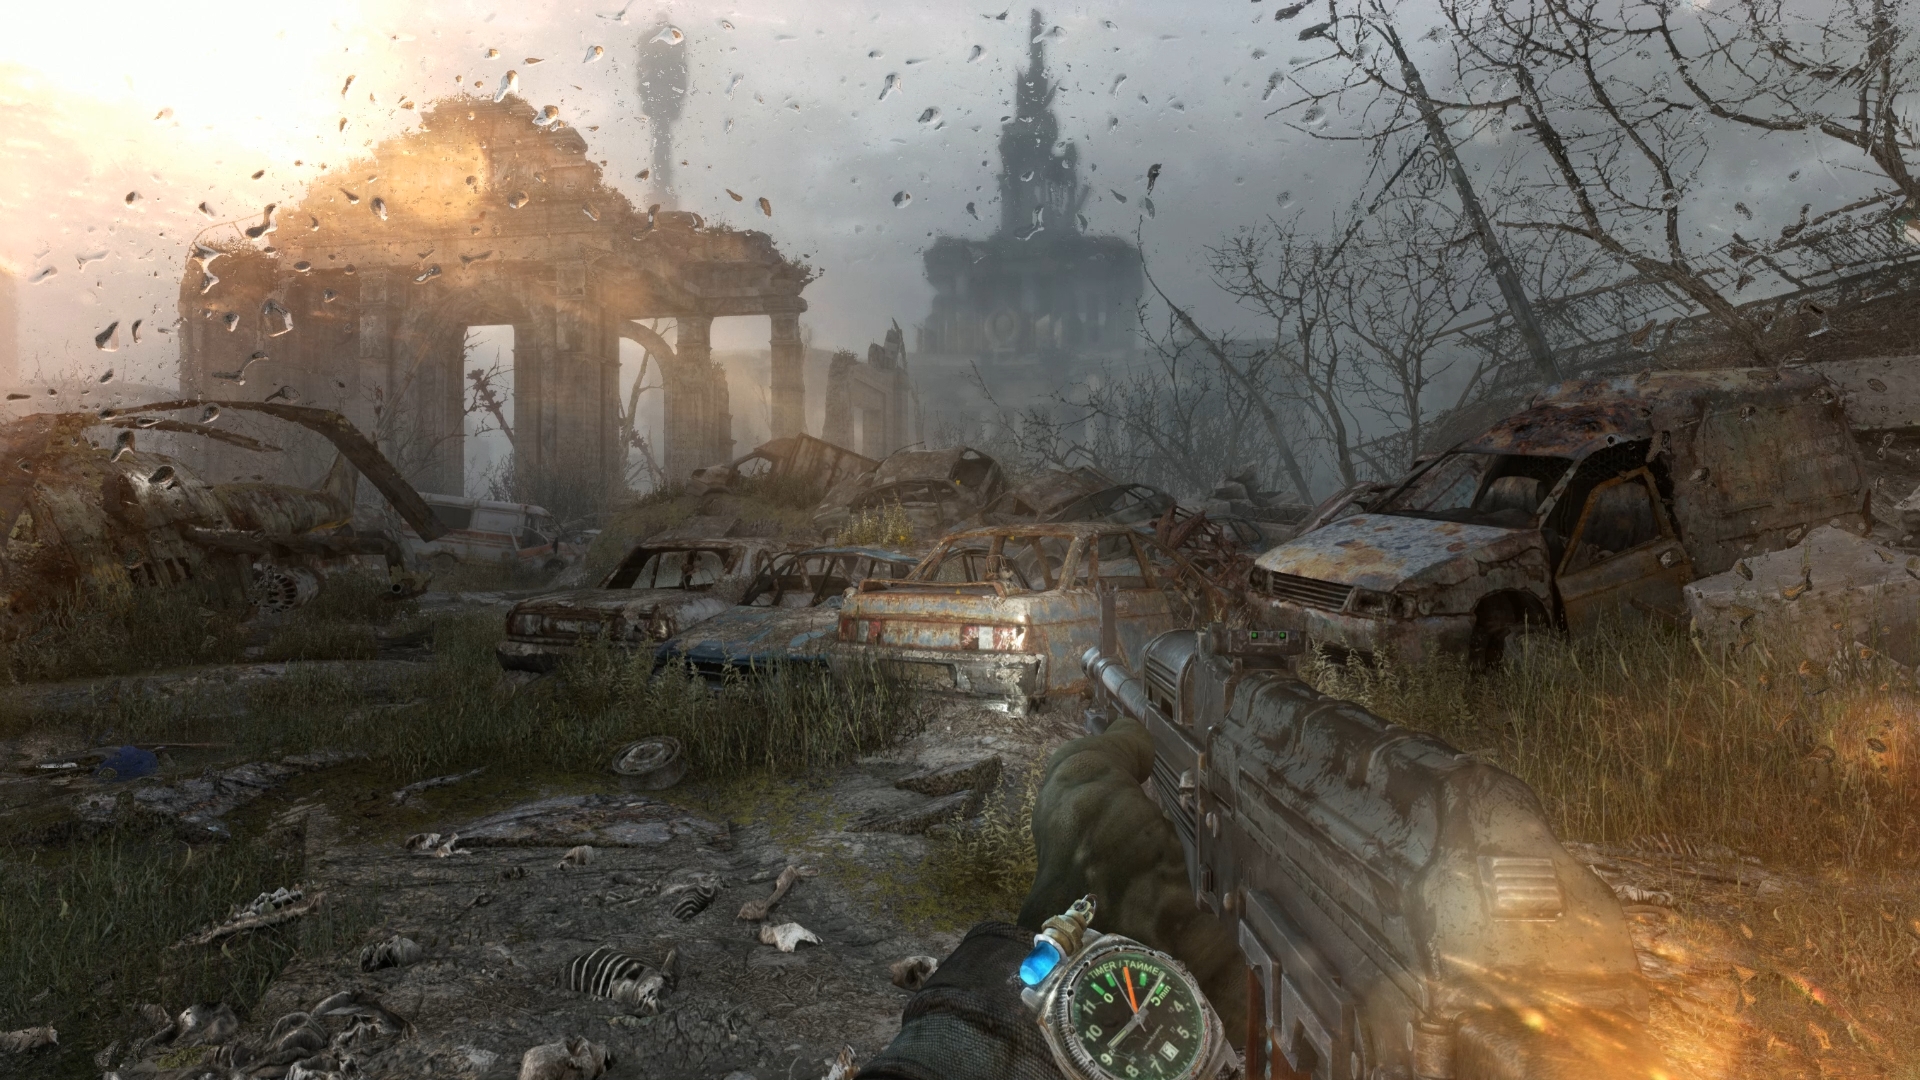 A thrilling first-person shooter with a post-nuclear war Moscow Metro setting is Metro: Last Light. Based on Metro Last Light Redux moral points and your...